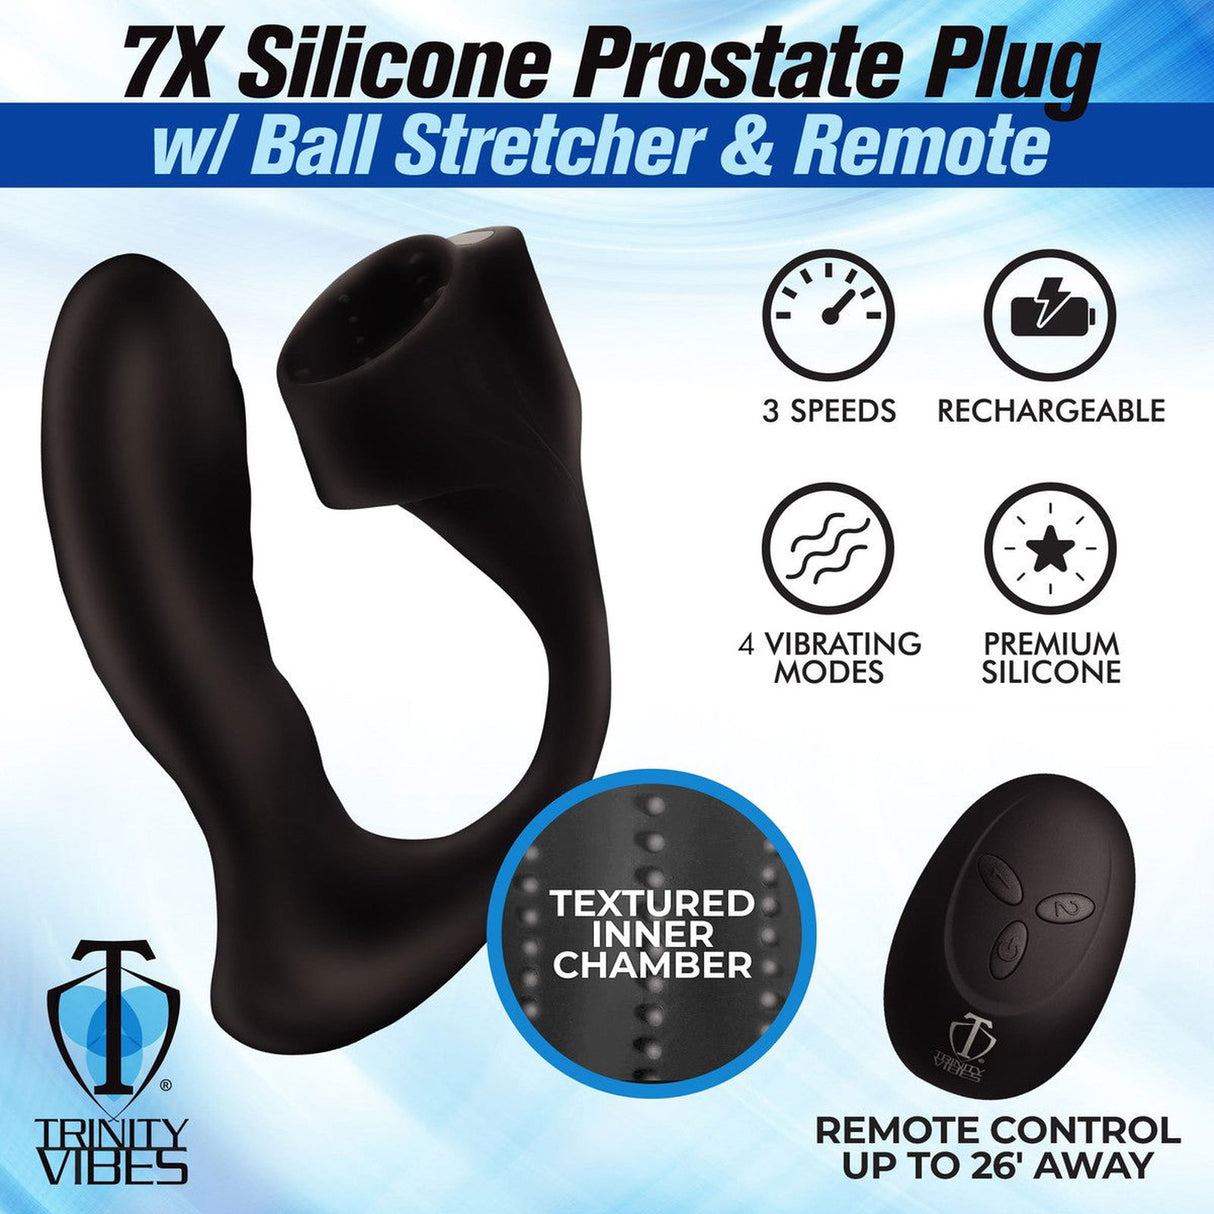 Trinity Vibes 7x Silicone Prostate Plug With Ball Stretcher And Remote - AdultLuxe